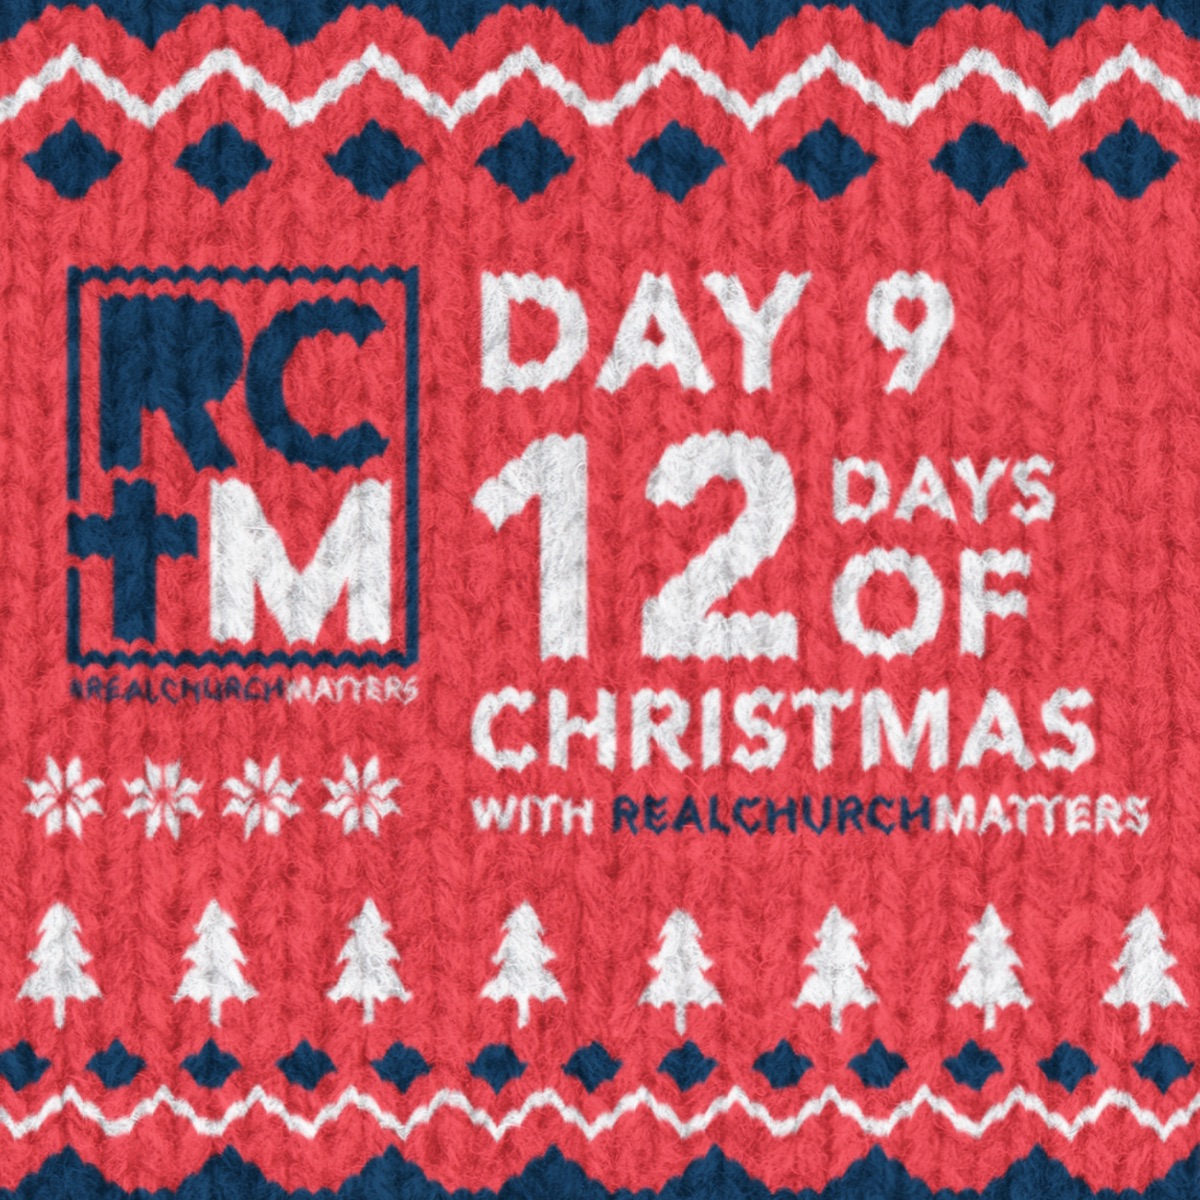 Day 9 - 12 Days of Christmas with Real Church Matters